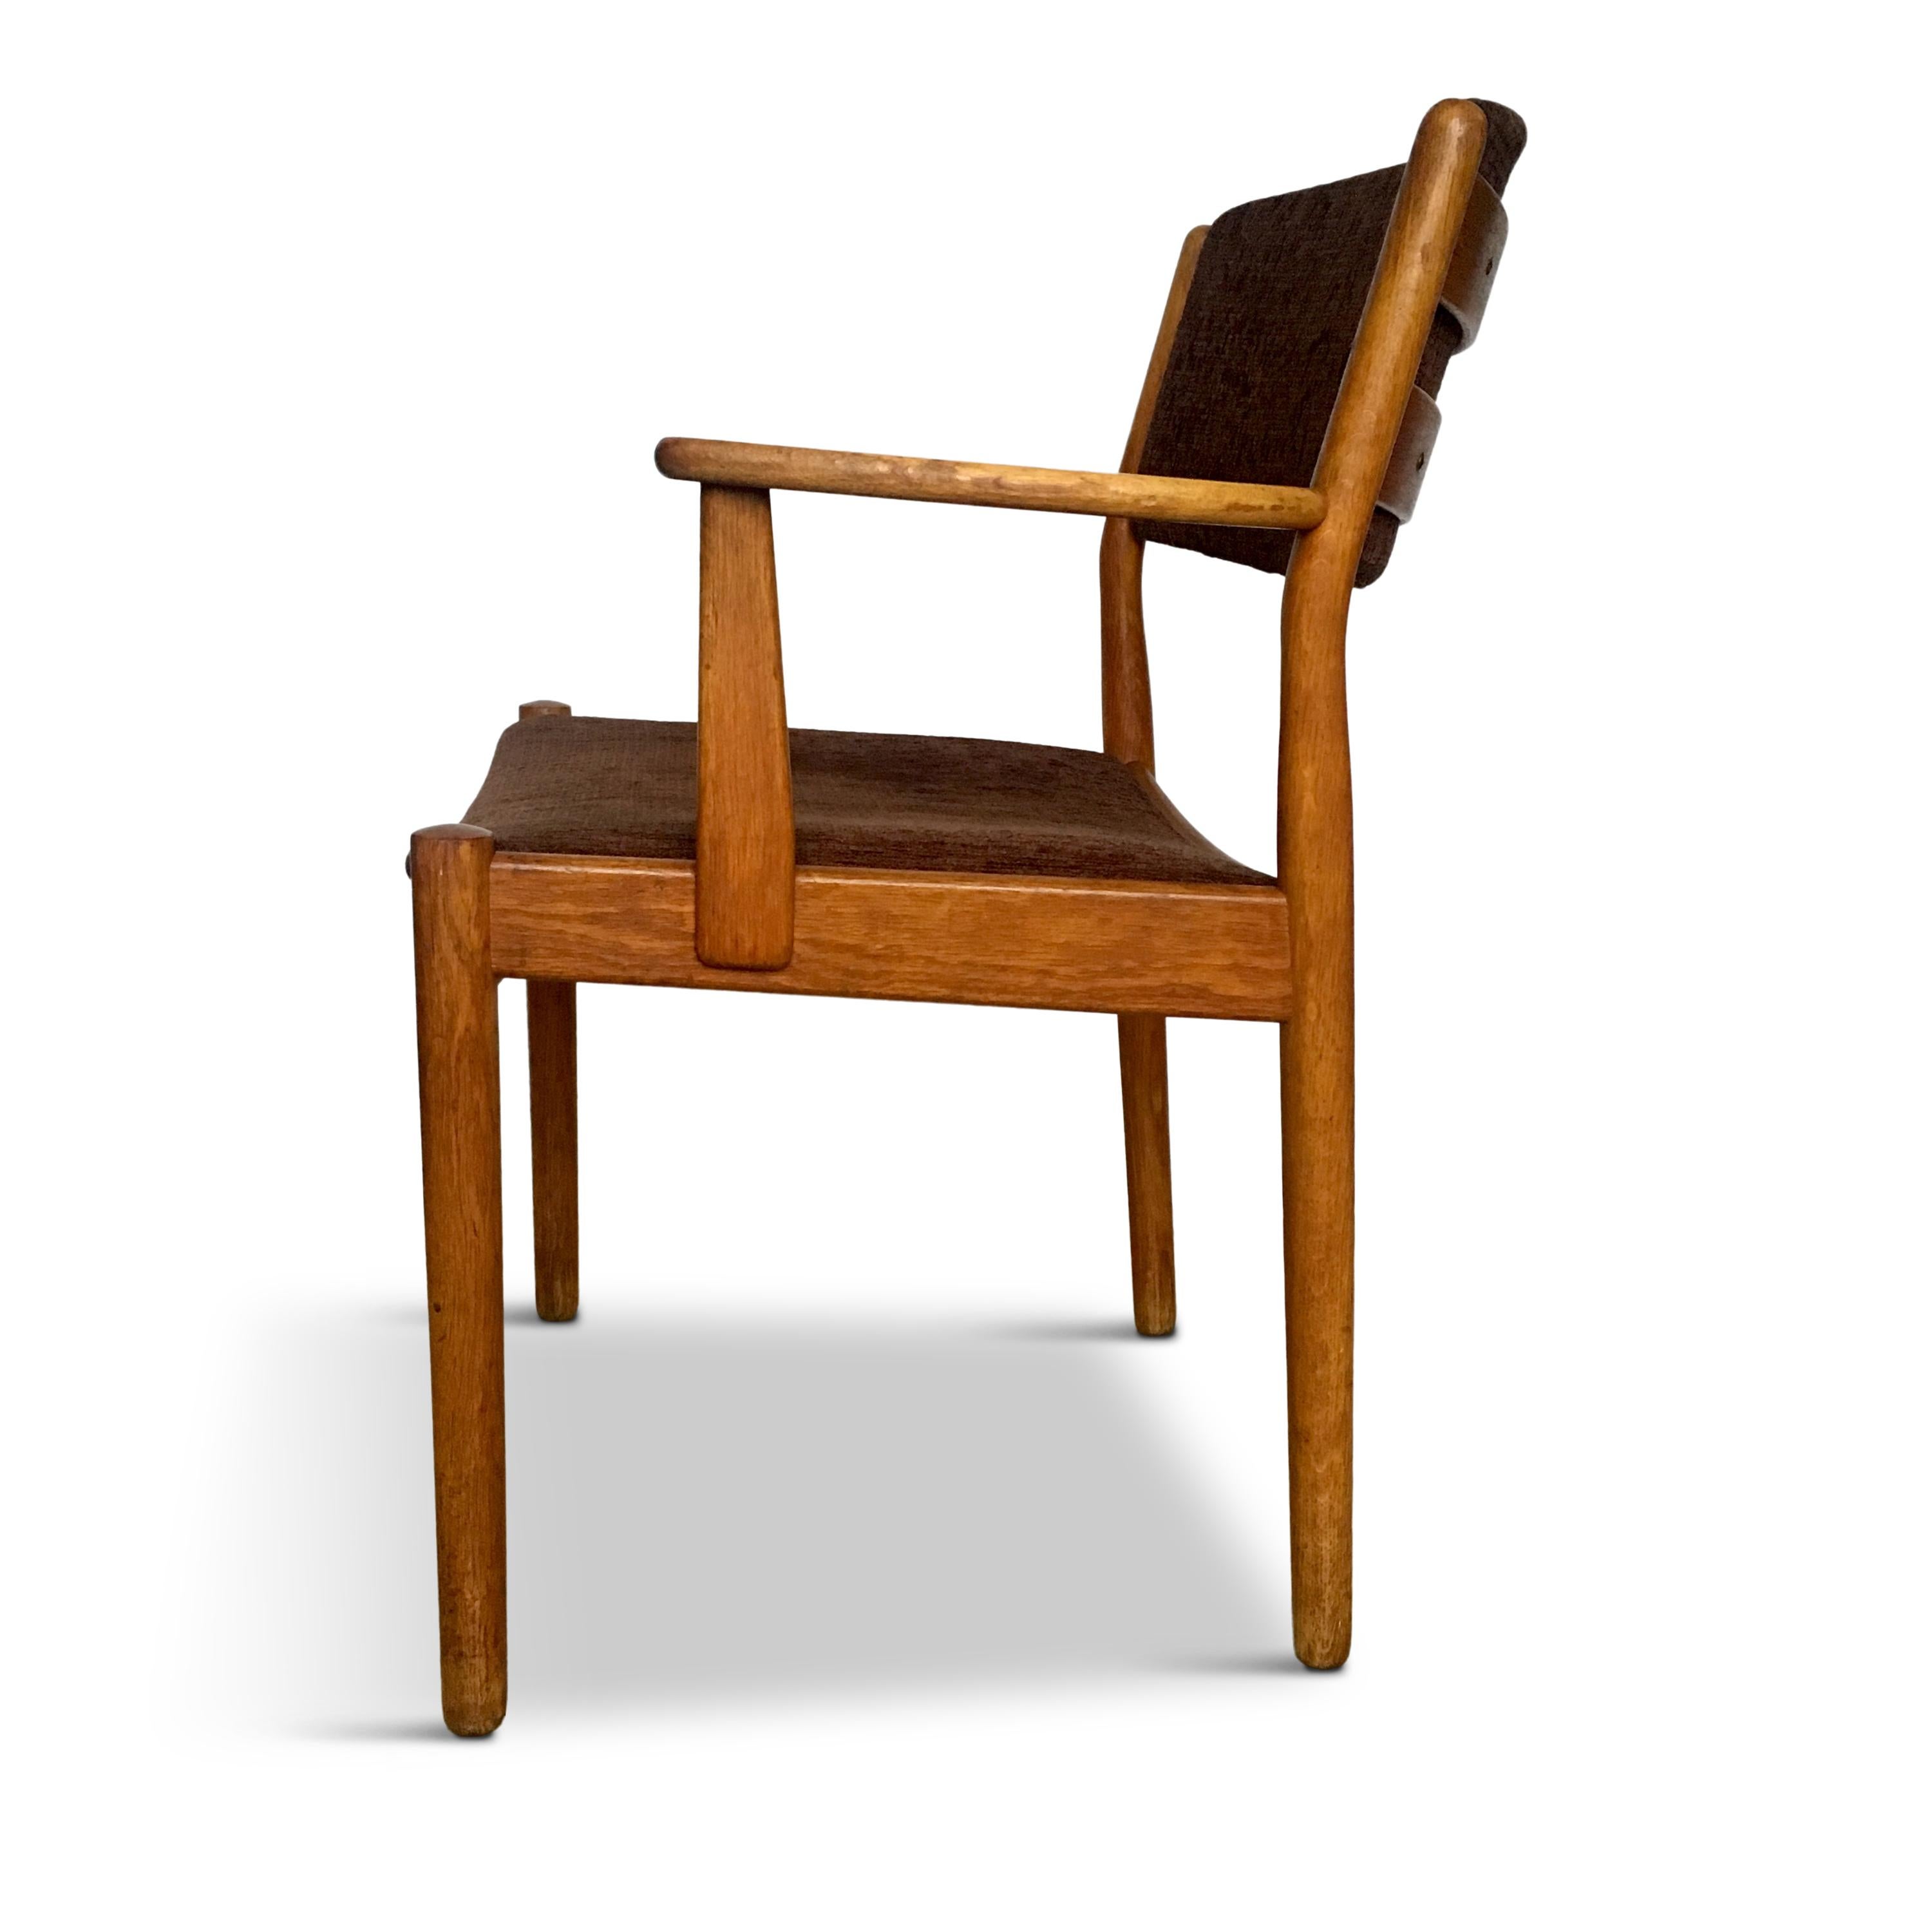 Swedish Midcentury Danish Oak Armchair by Poul Volther for FDB Møbler, 1950s For Sale